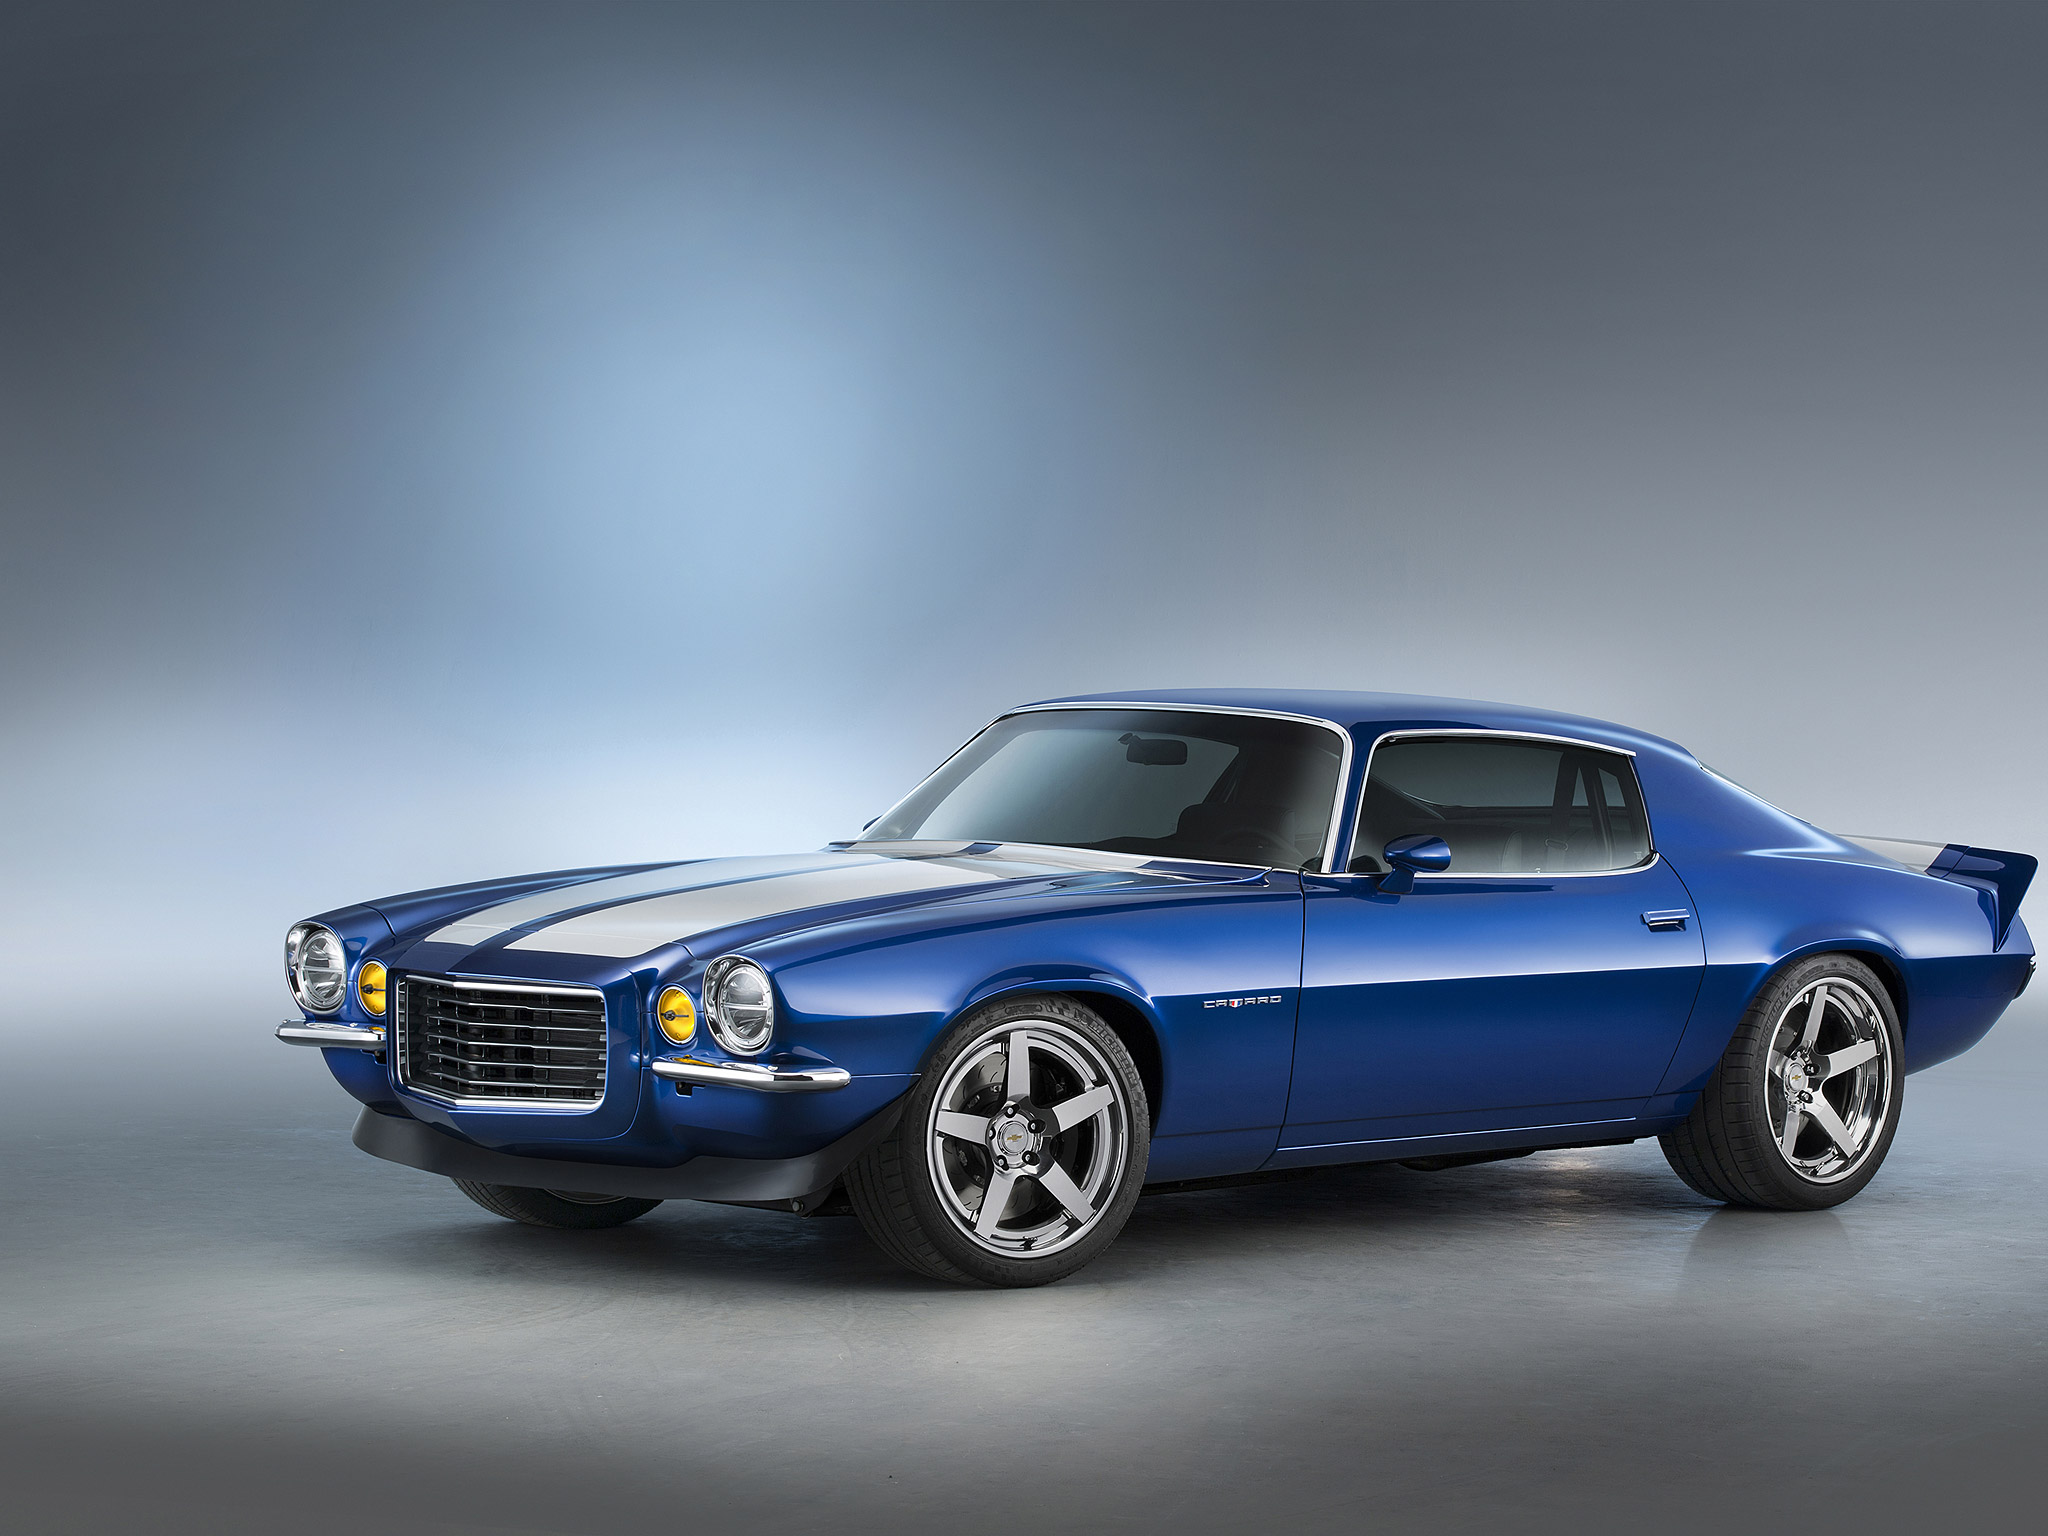  2015 Chevrolet 1970 Camaro RS Supercharged LT4 Concept Wallpaper.